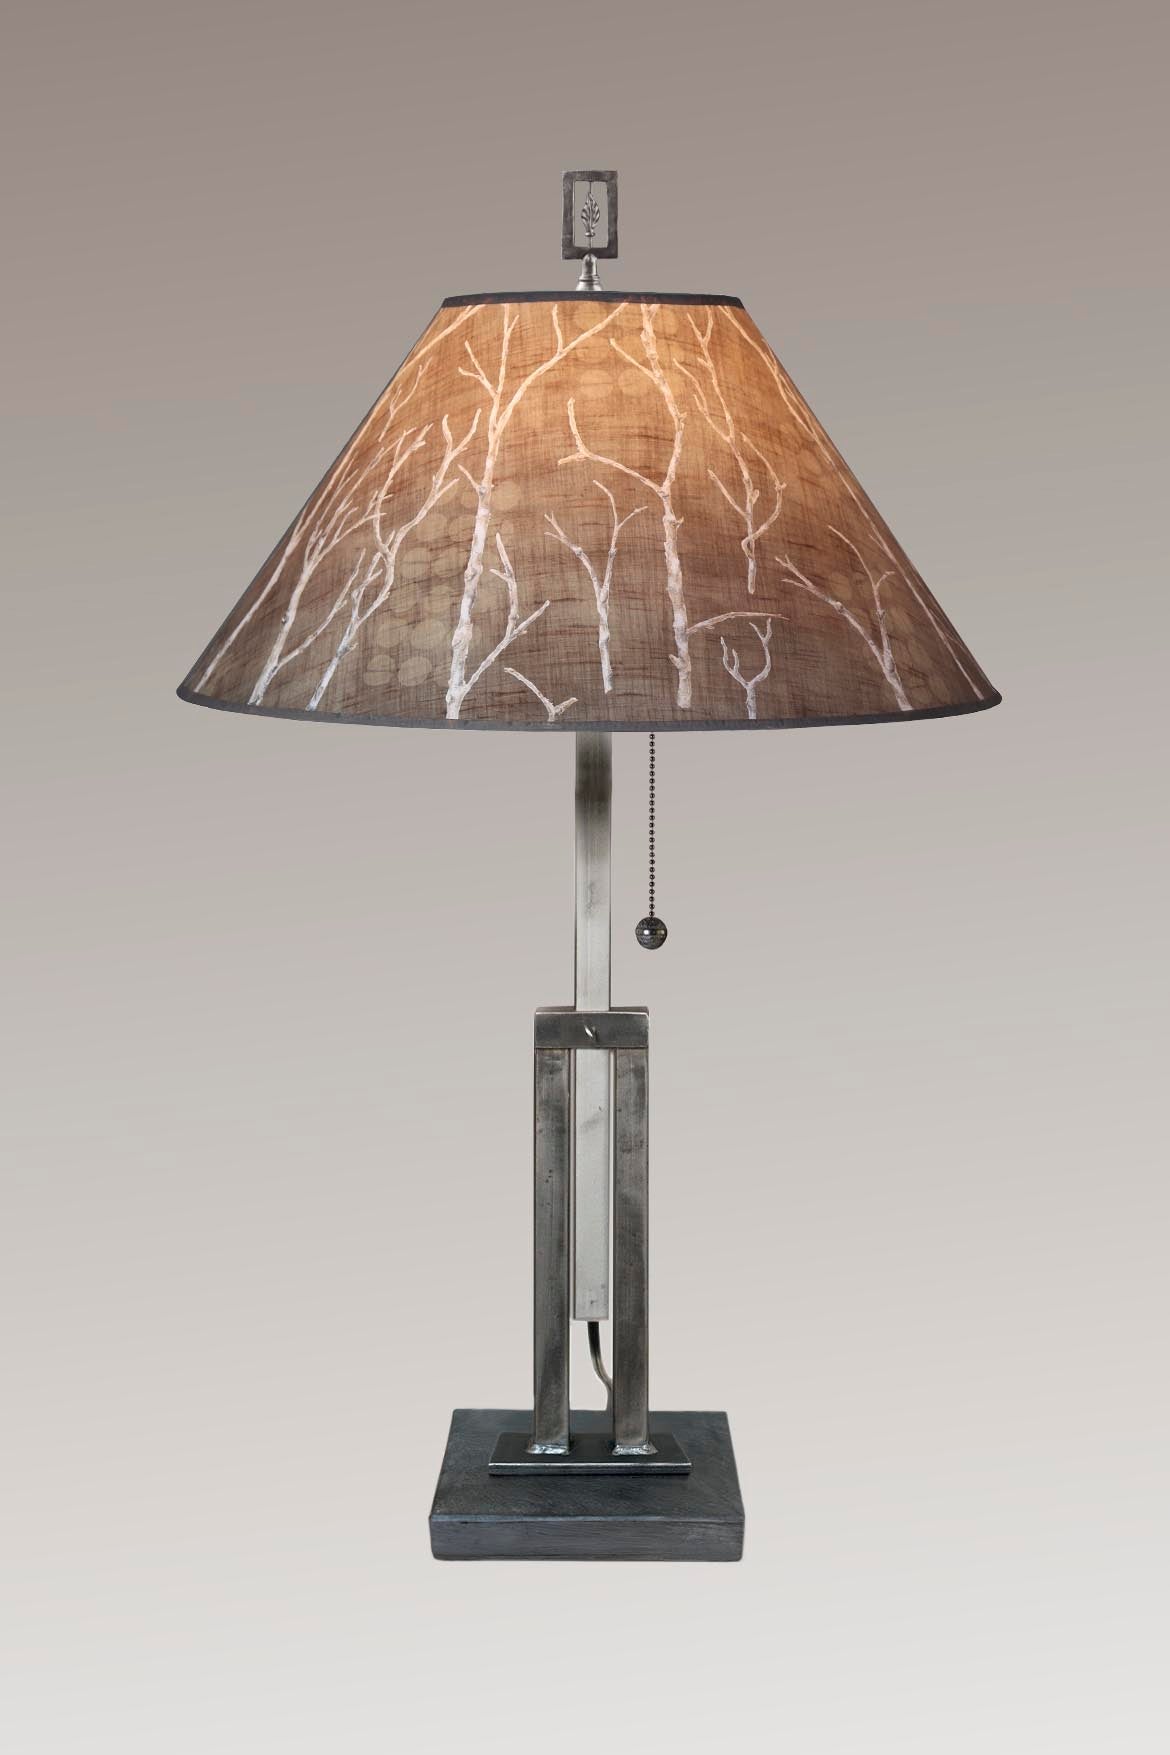 Janna Ugone &amp; Co Table Lamp Adjustable-Height Steel Table Lamp with Large Conical Shade in Twigs